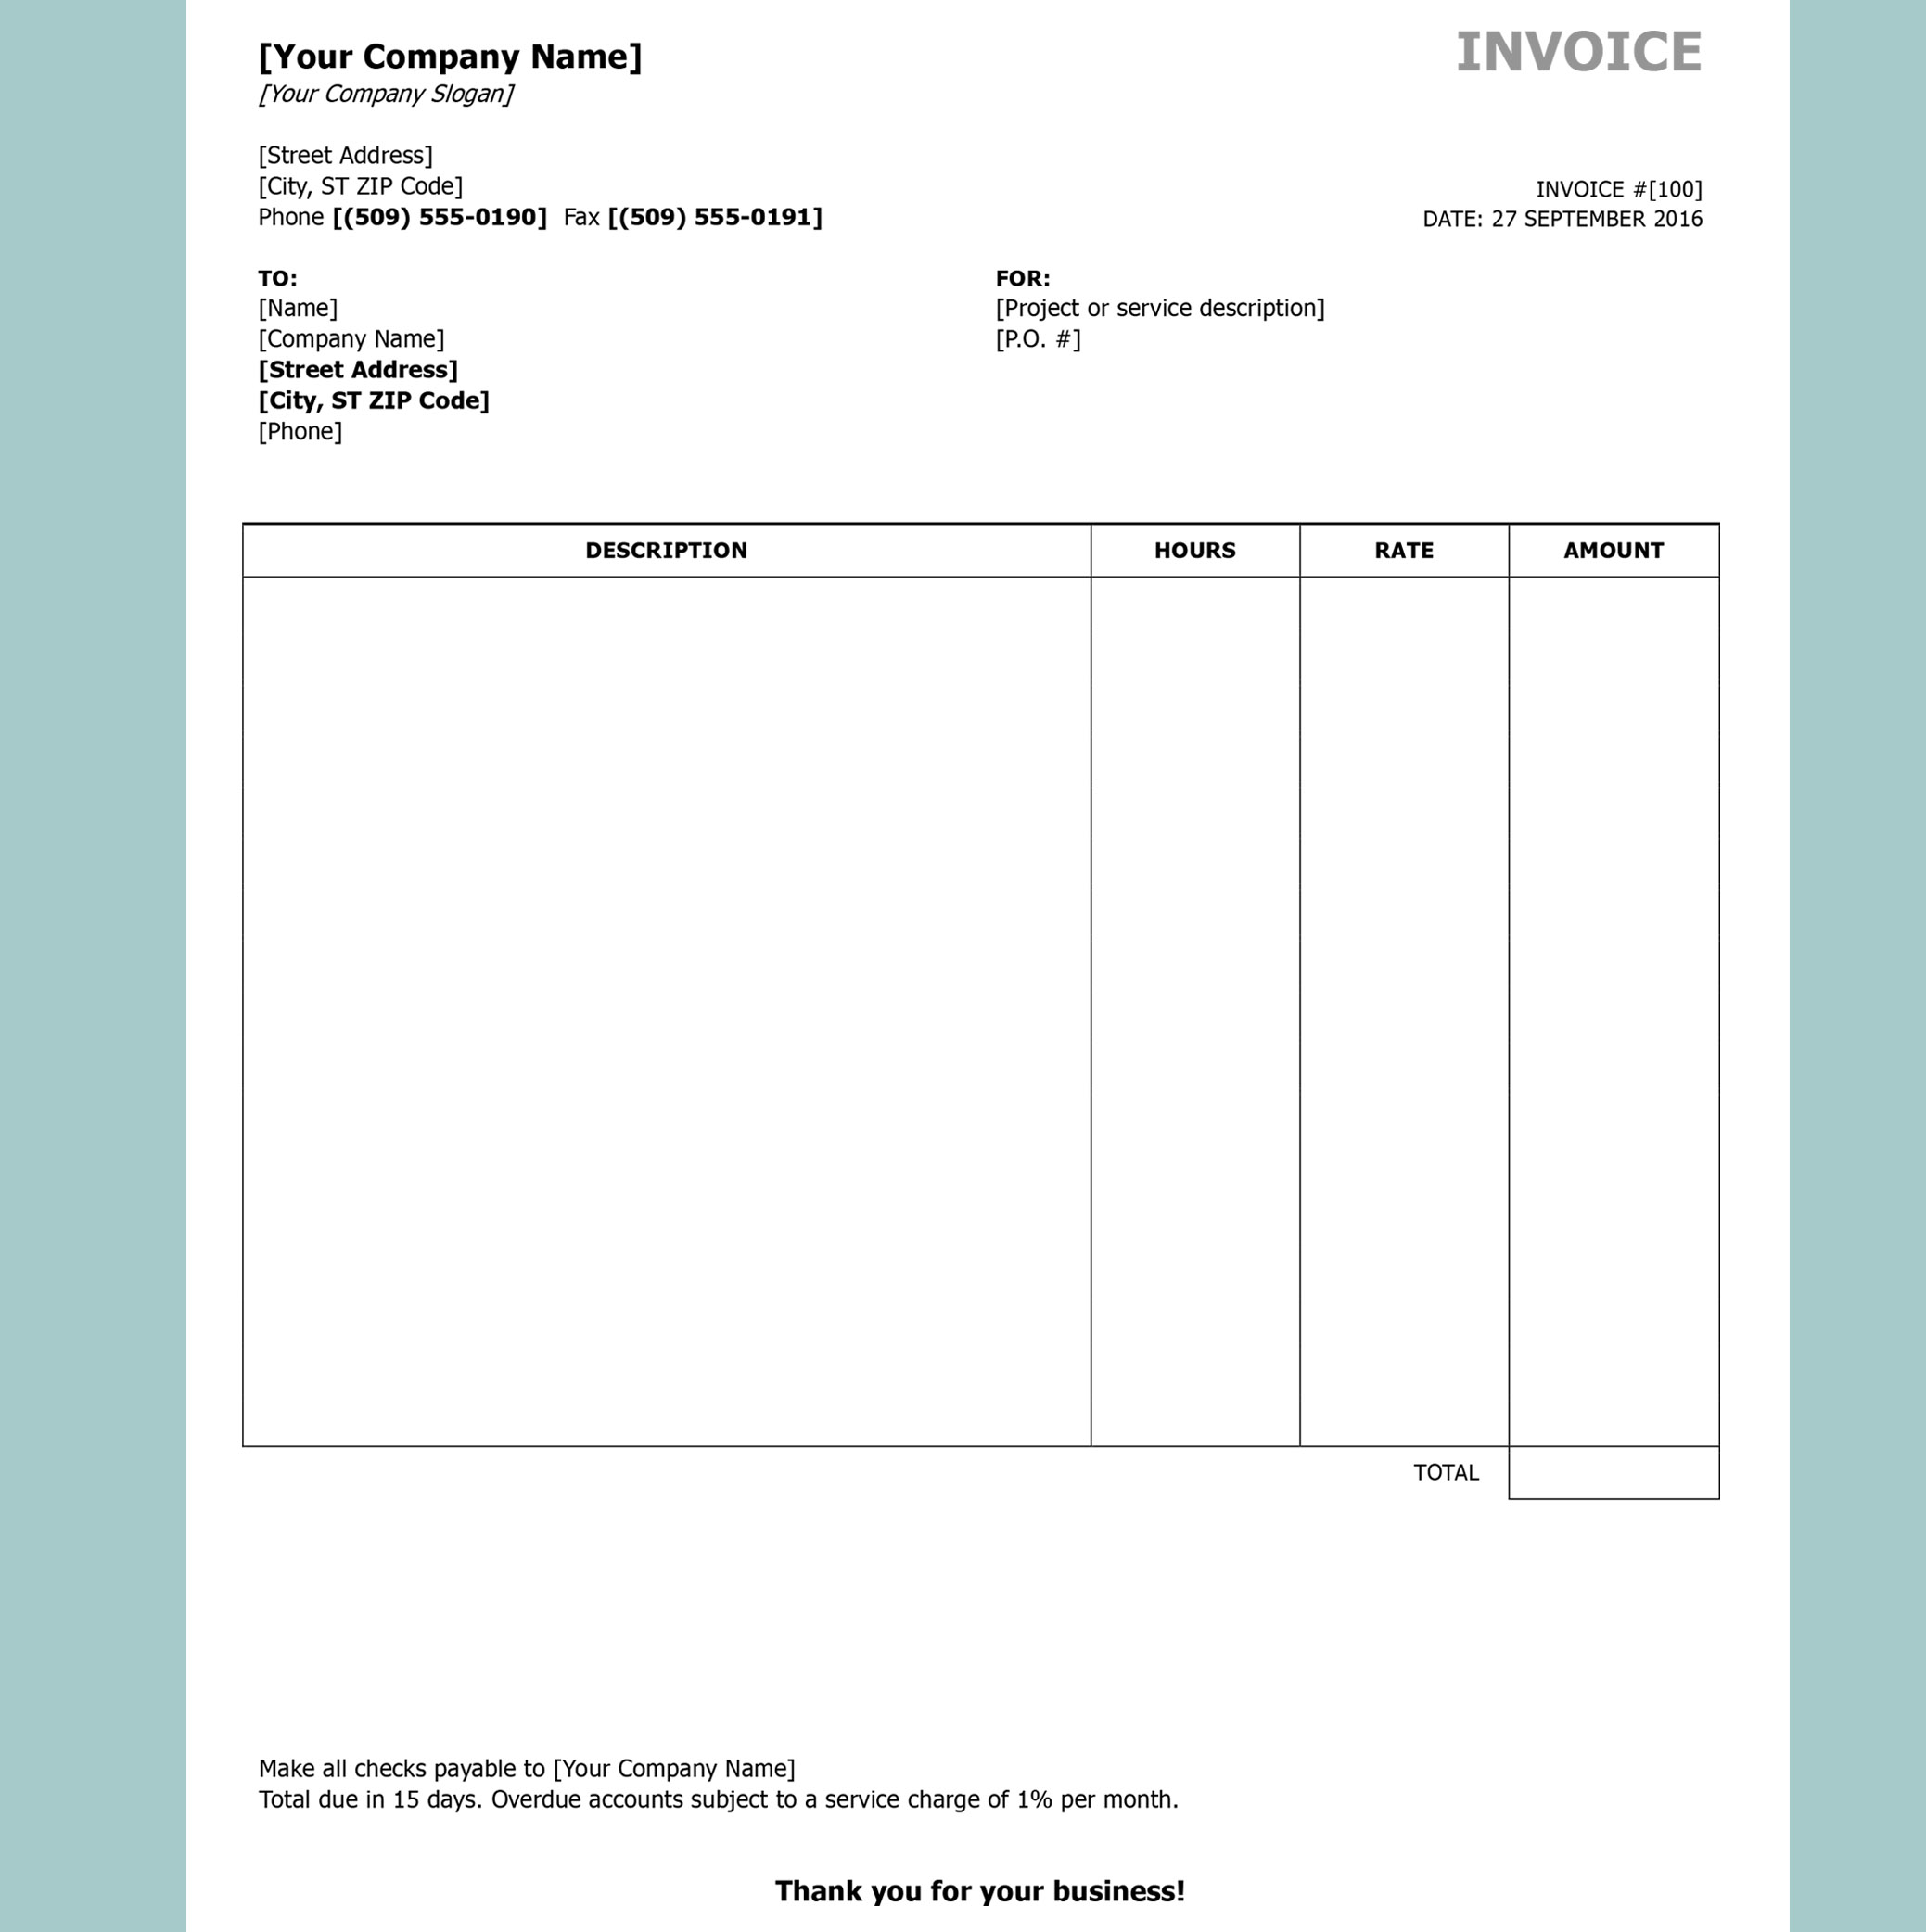 Free Invoice Templates by InvoiceBerry - The Grid System In Free Downloadable Invoice Template For Word